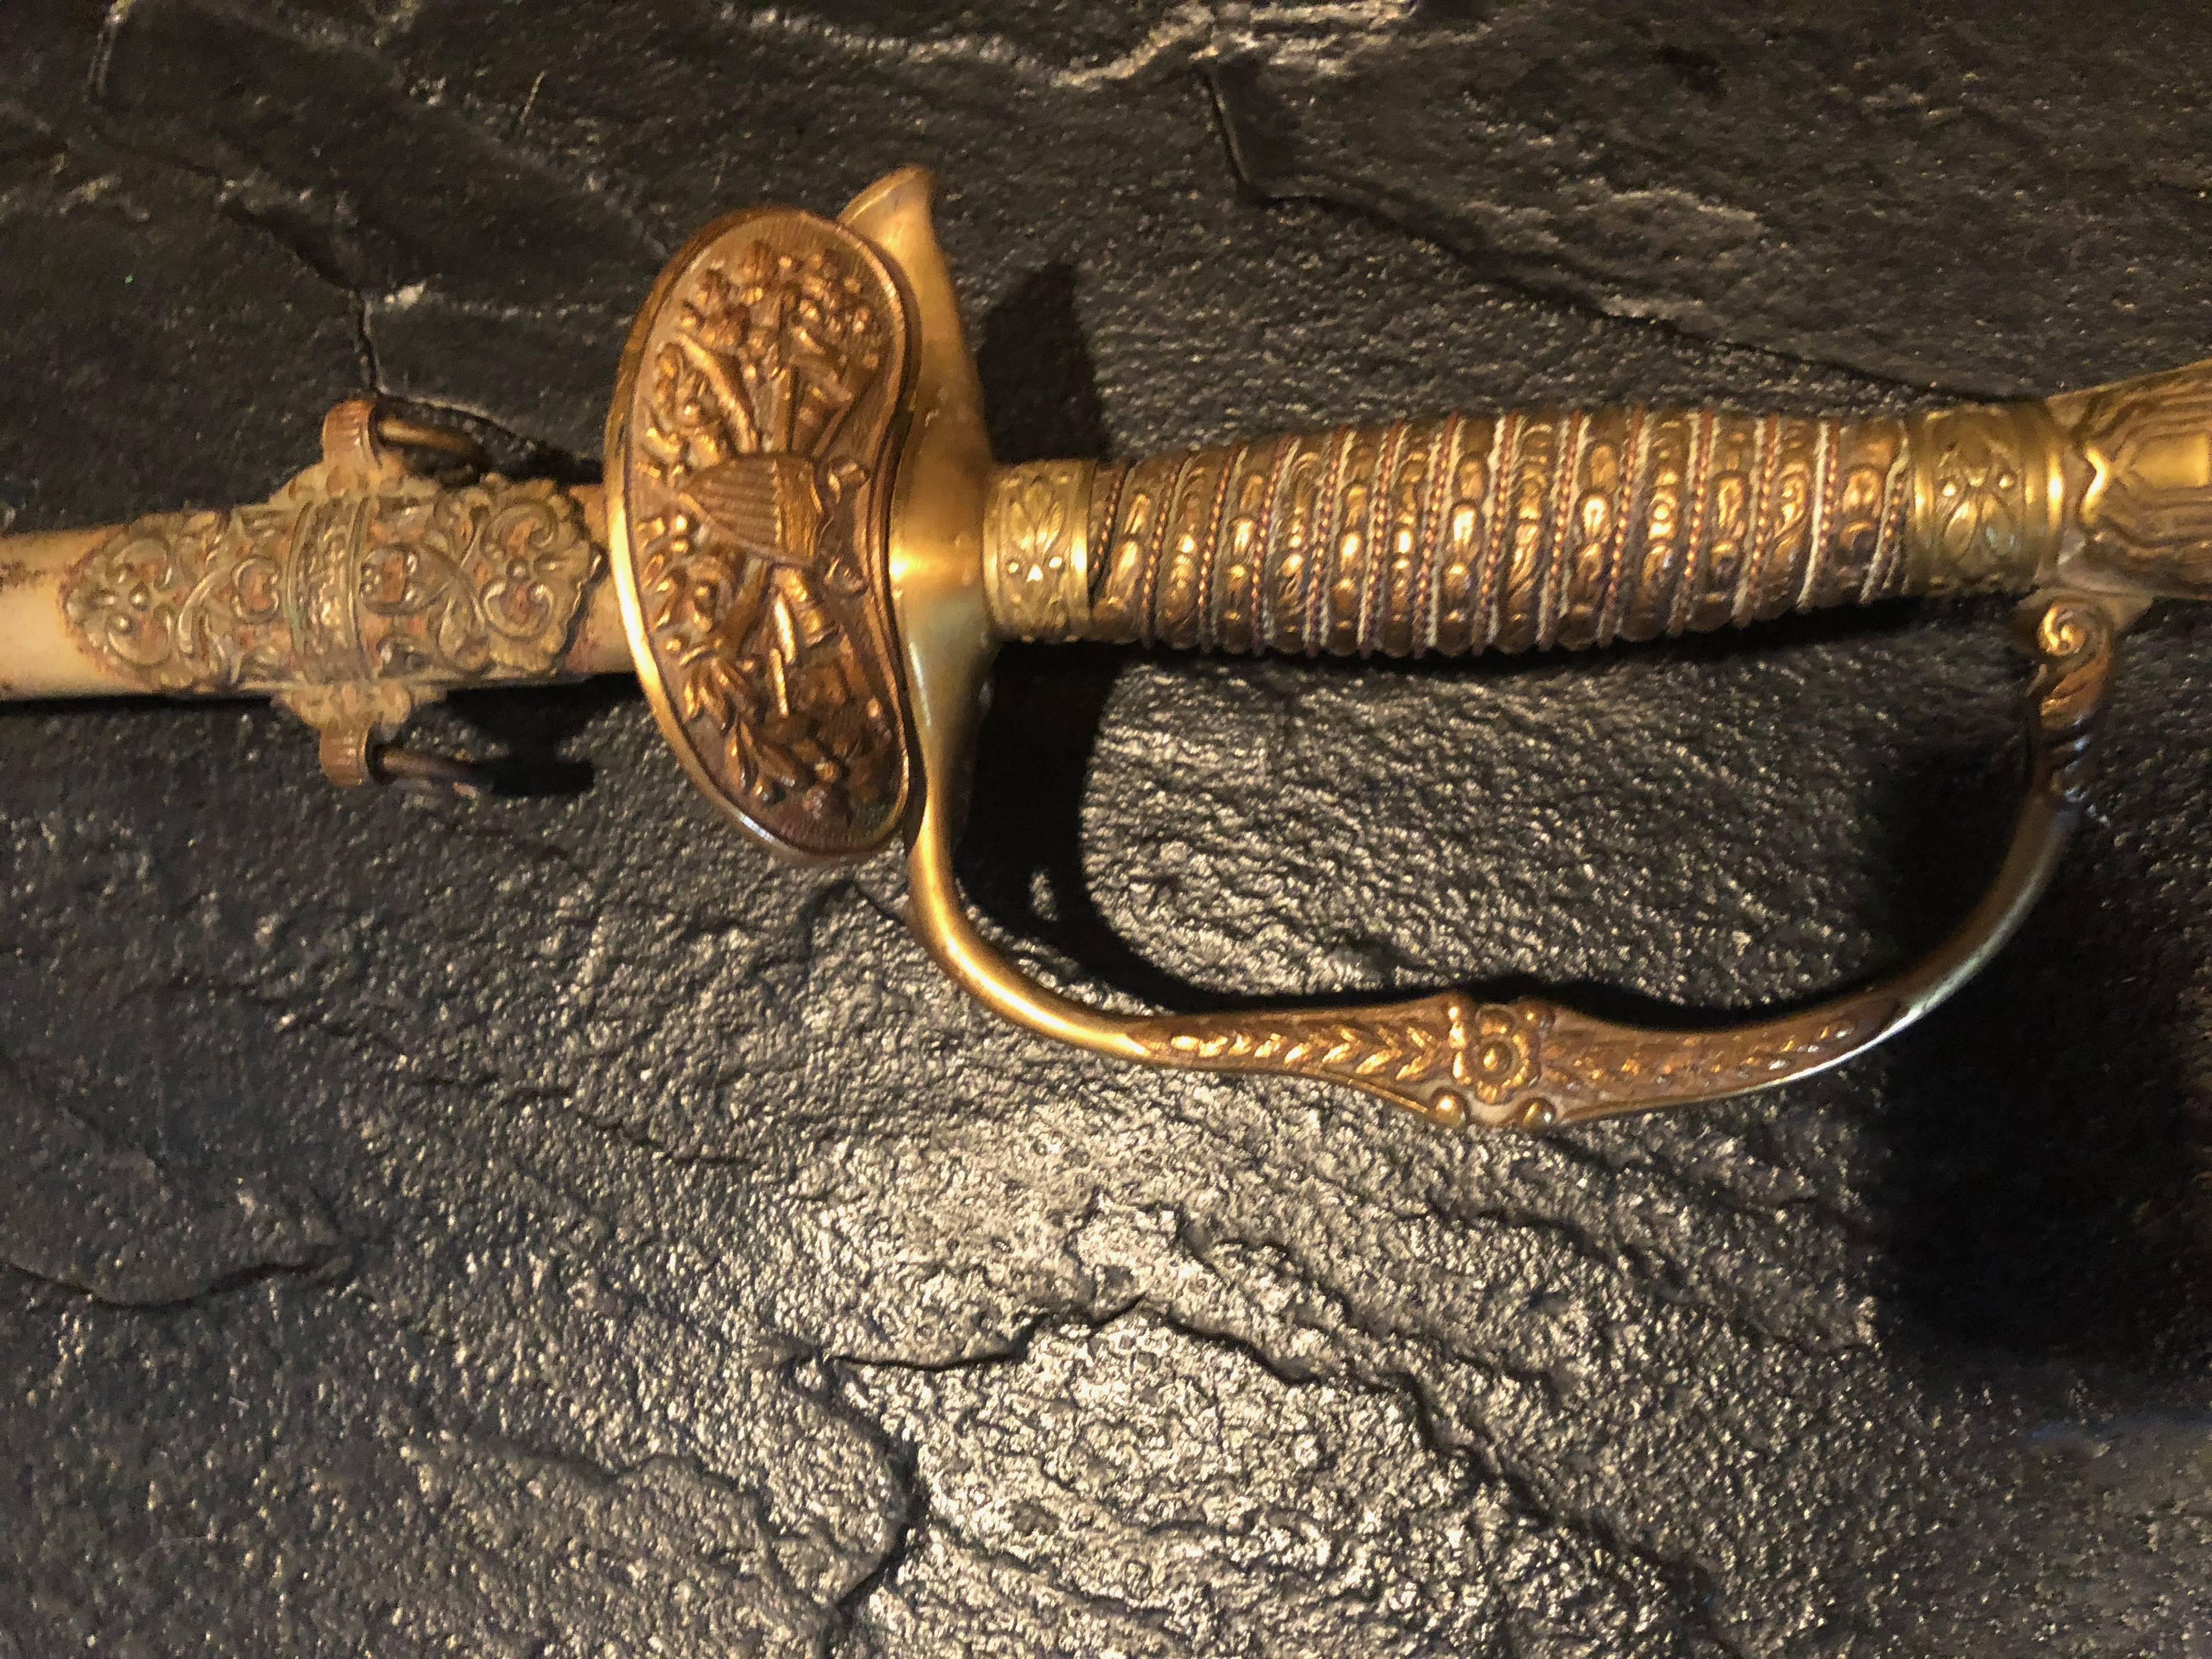 Nice Civil War era Union model 1860 field and staff officer's sword. Sword has deluxe pattern with solid brass wire wrapped handle. Blade is etched with draped flag motif.